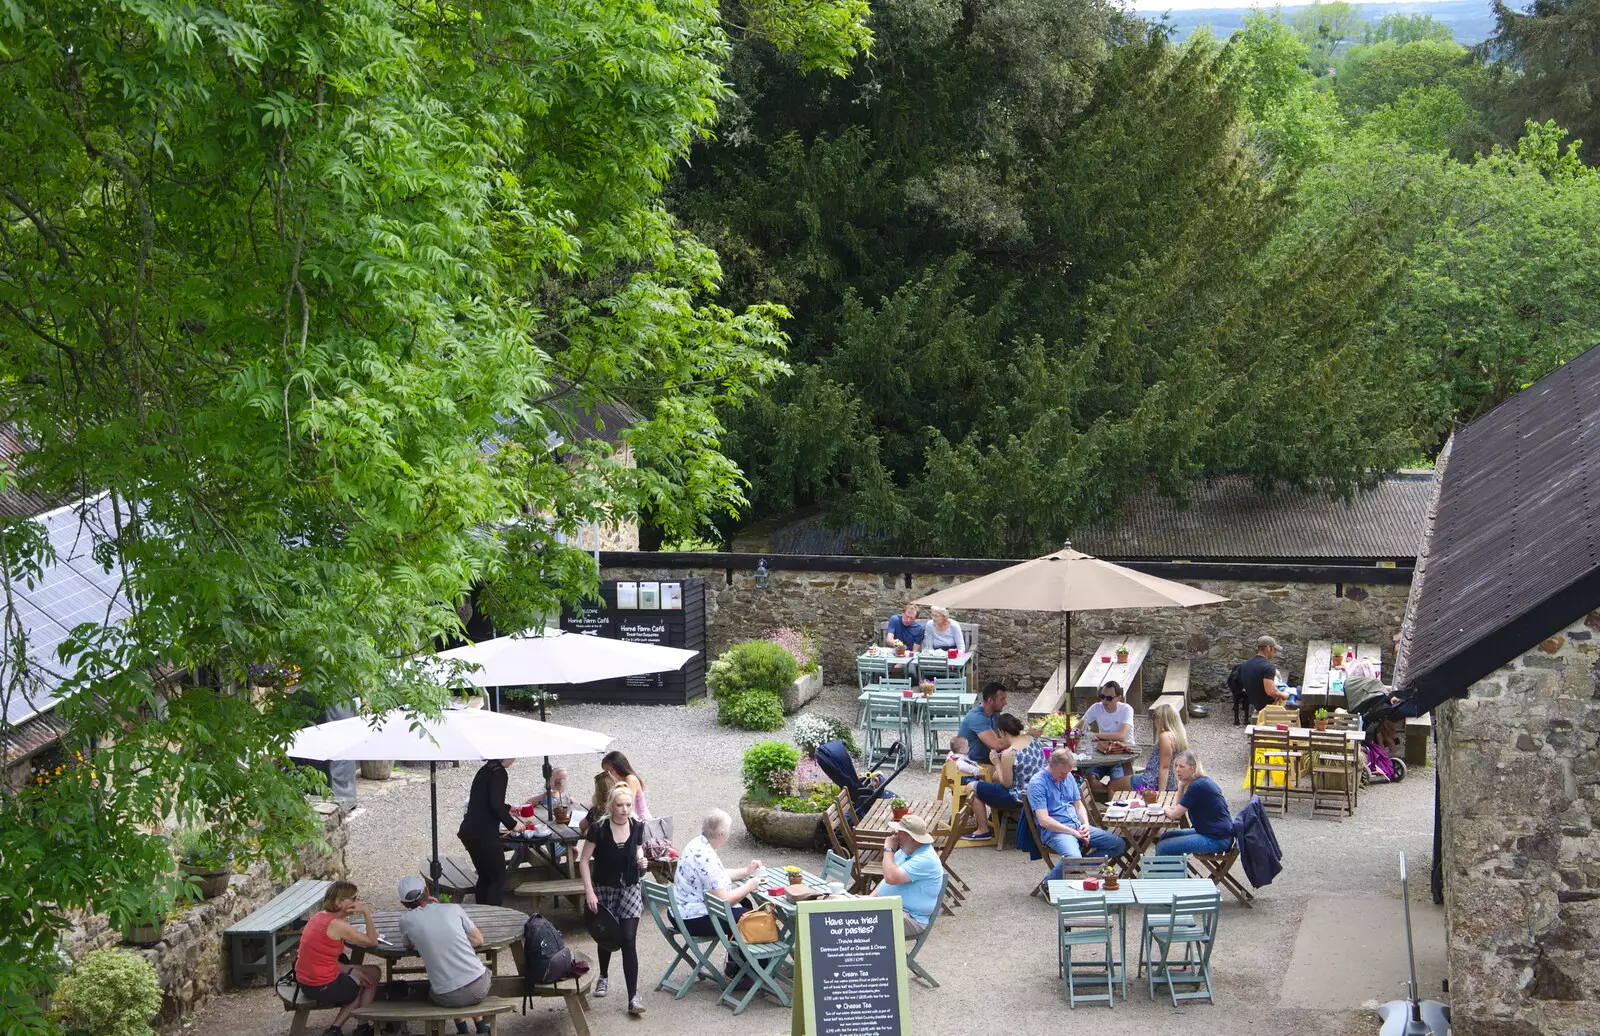 A view of the café, from Chagford Lido and a Trip to Parke, Bovey Tracey, Devon - 25th May 2019